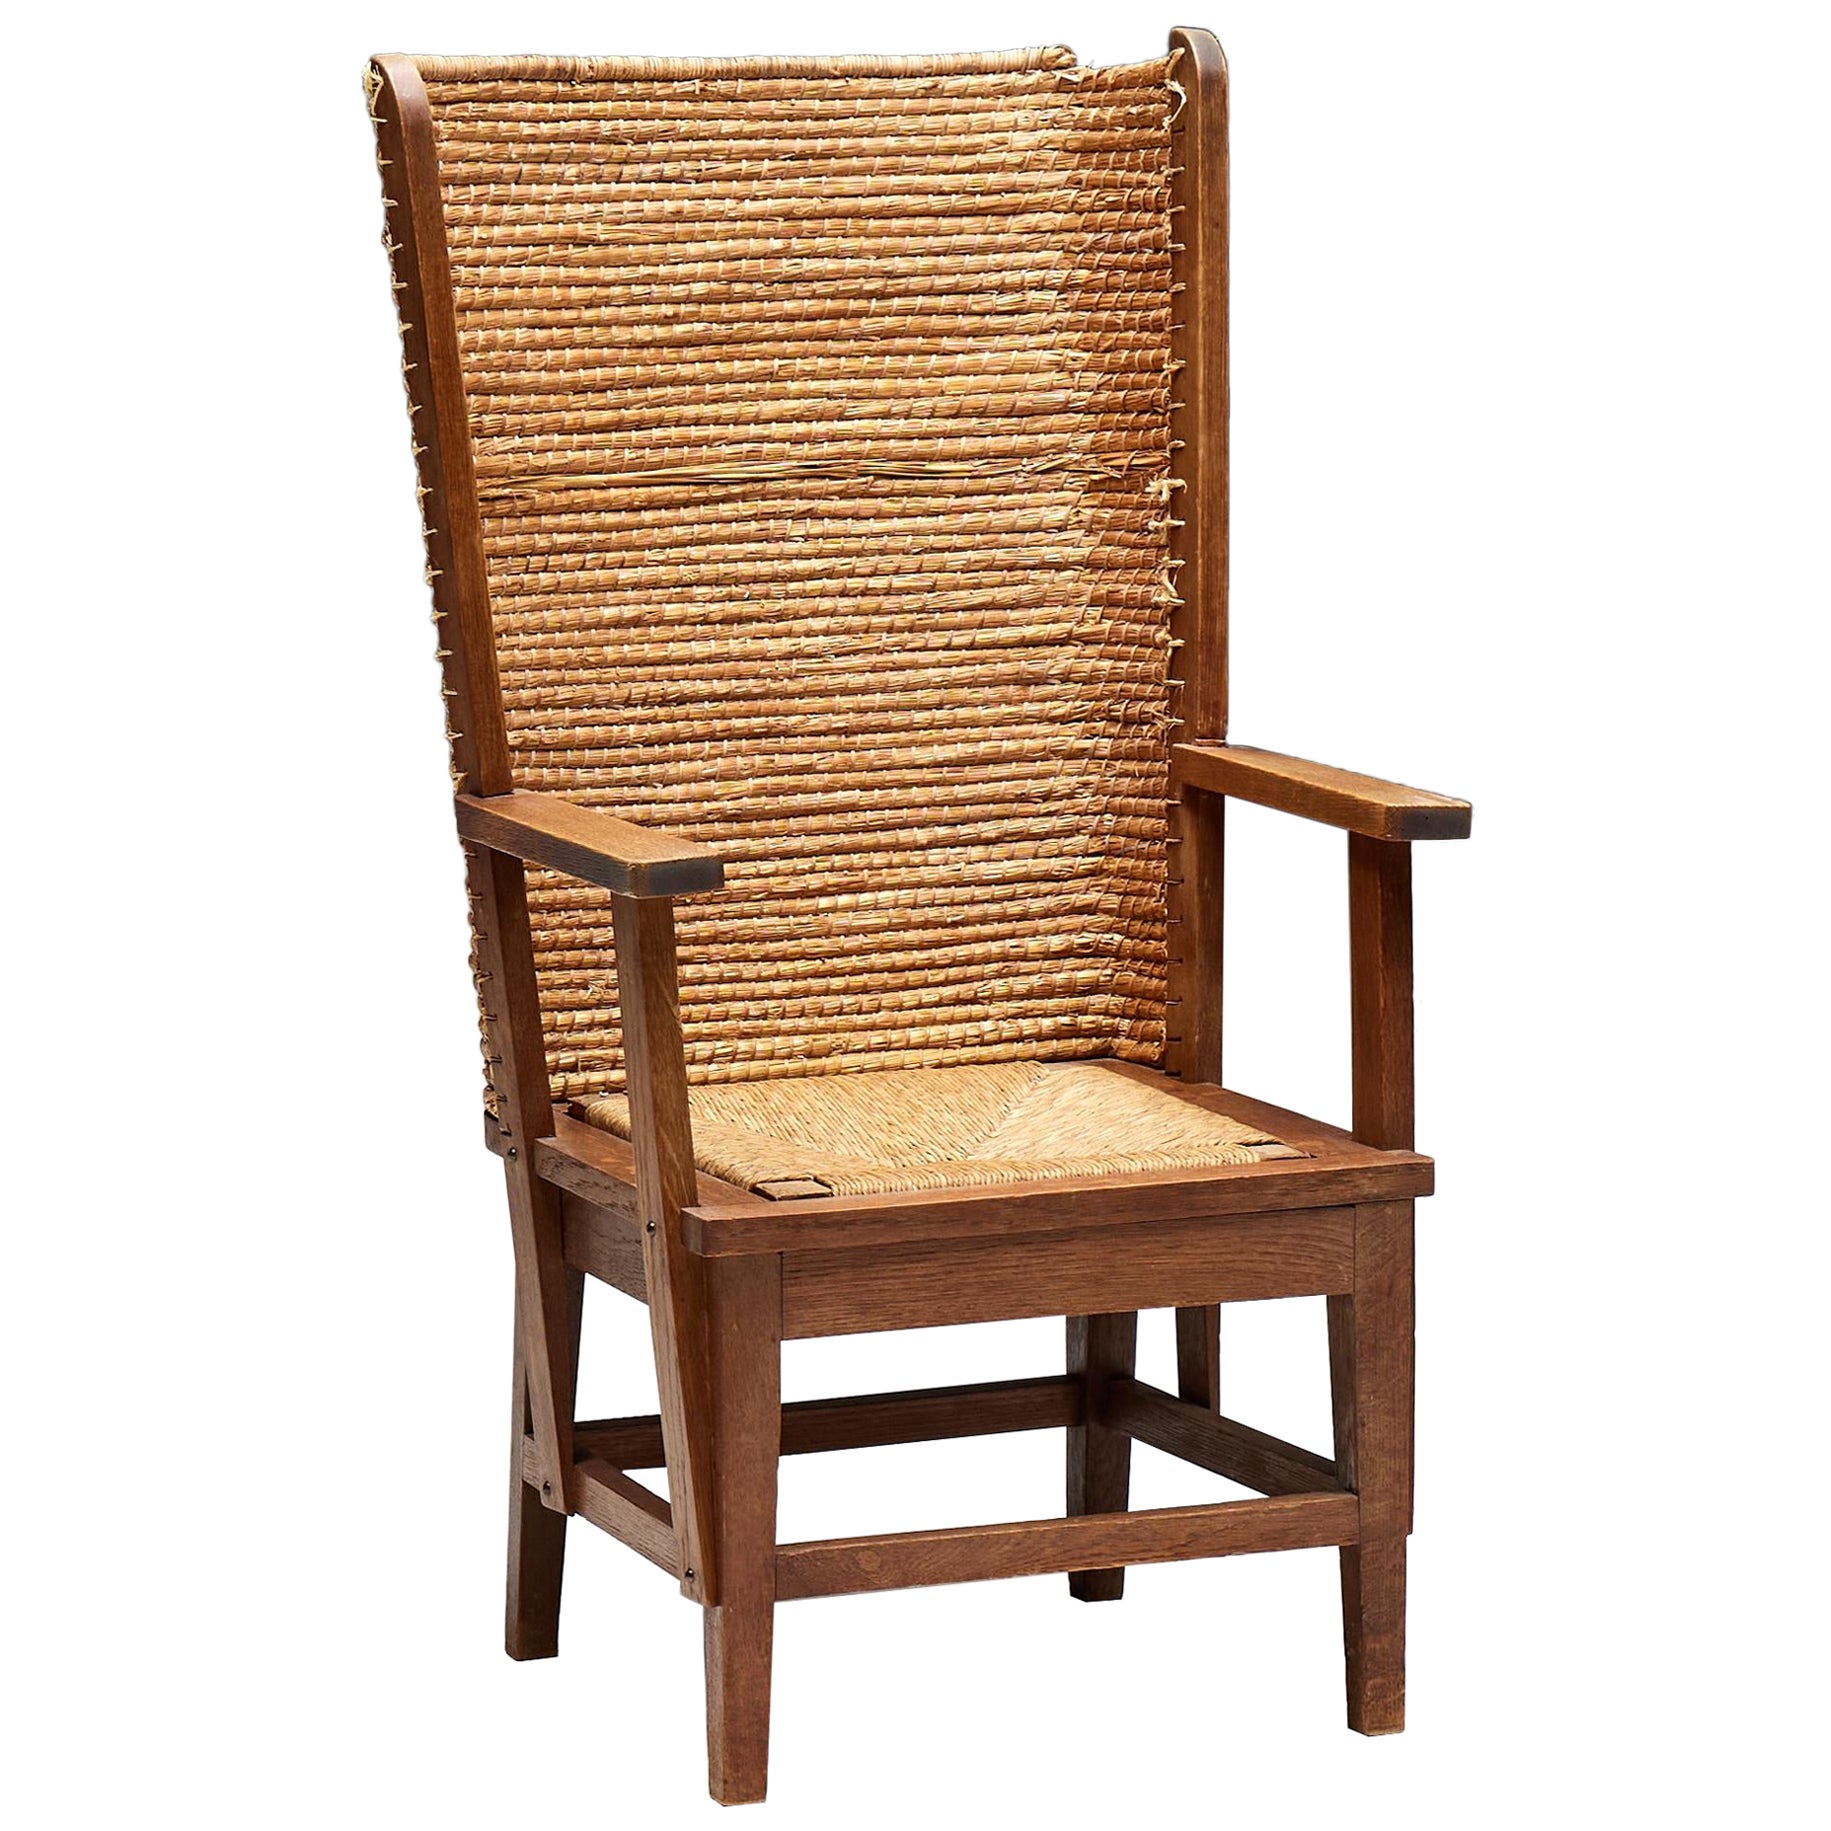 Orkney Chair in Wood and Oat Straw, Scotland, 19th Century For Sale